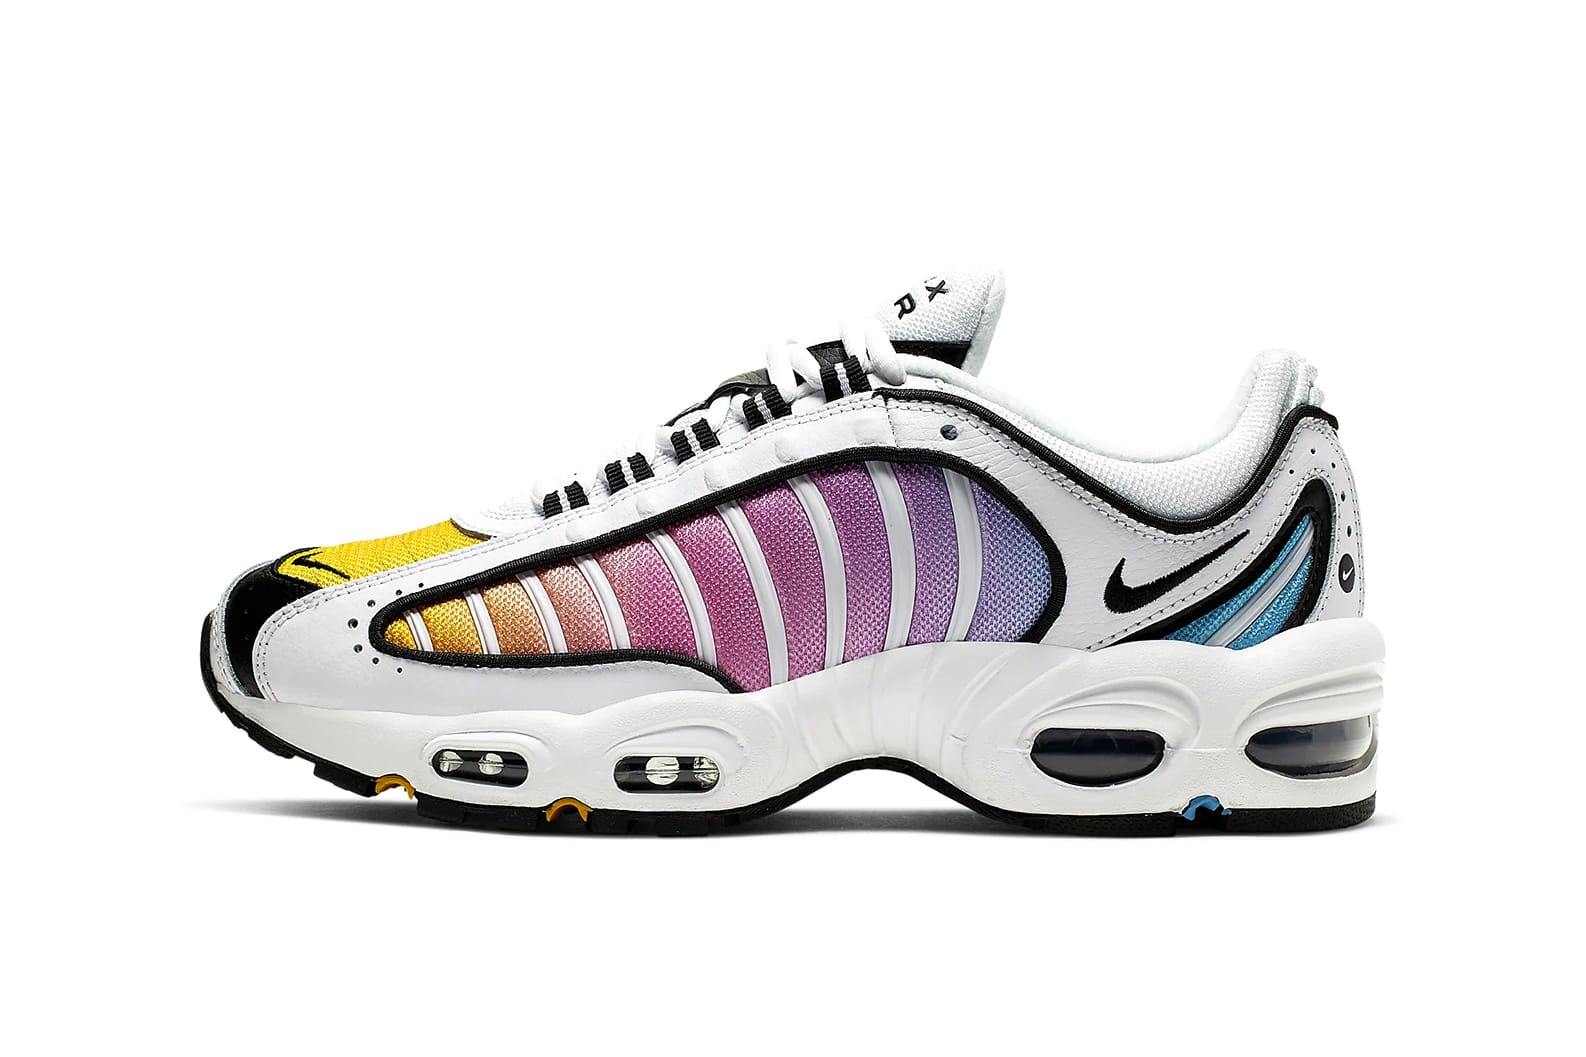 Nike Air Max Tailwind IV in Colorful 